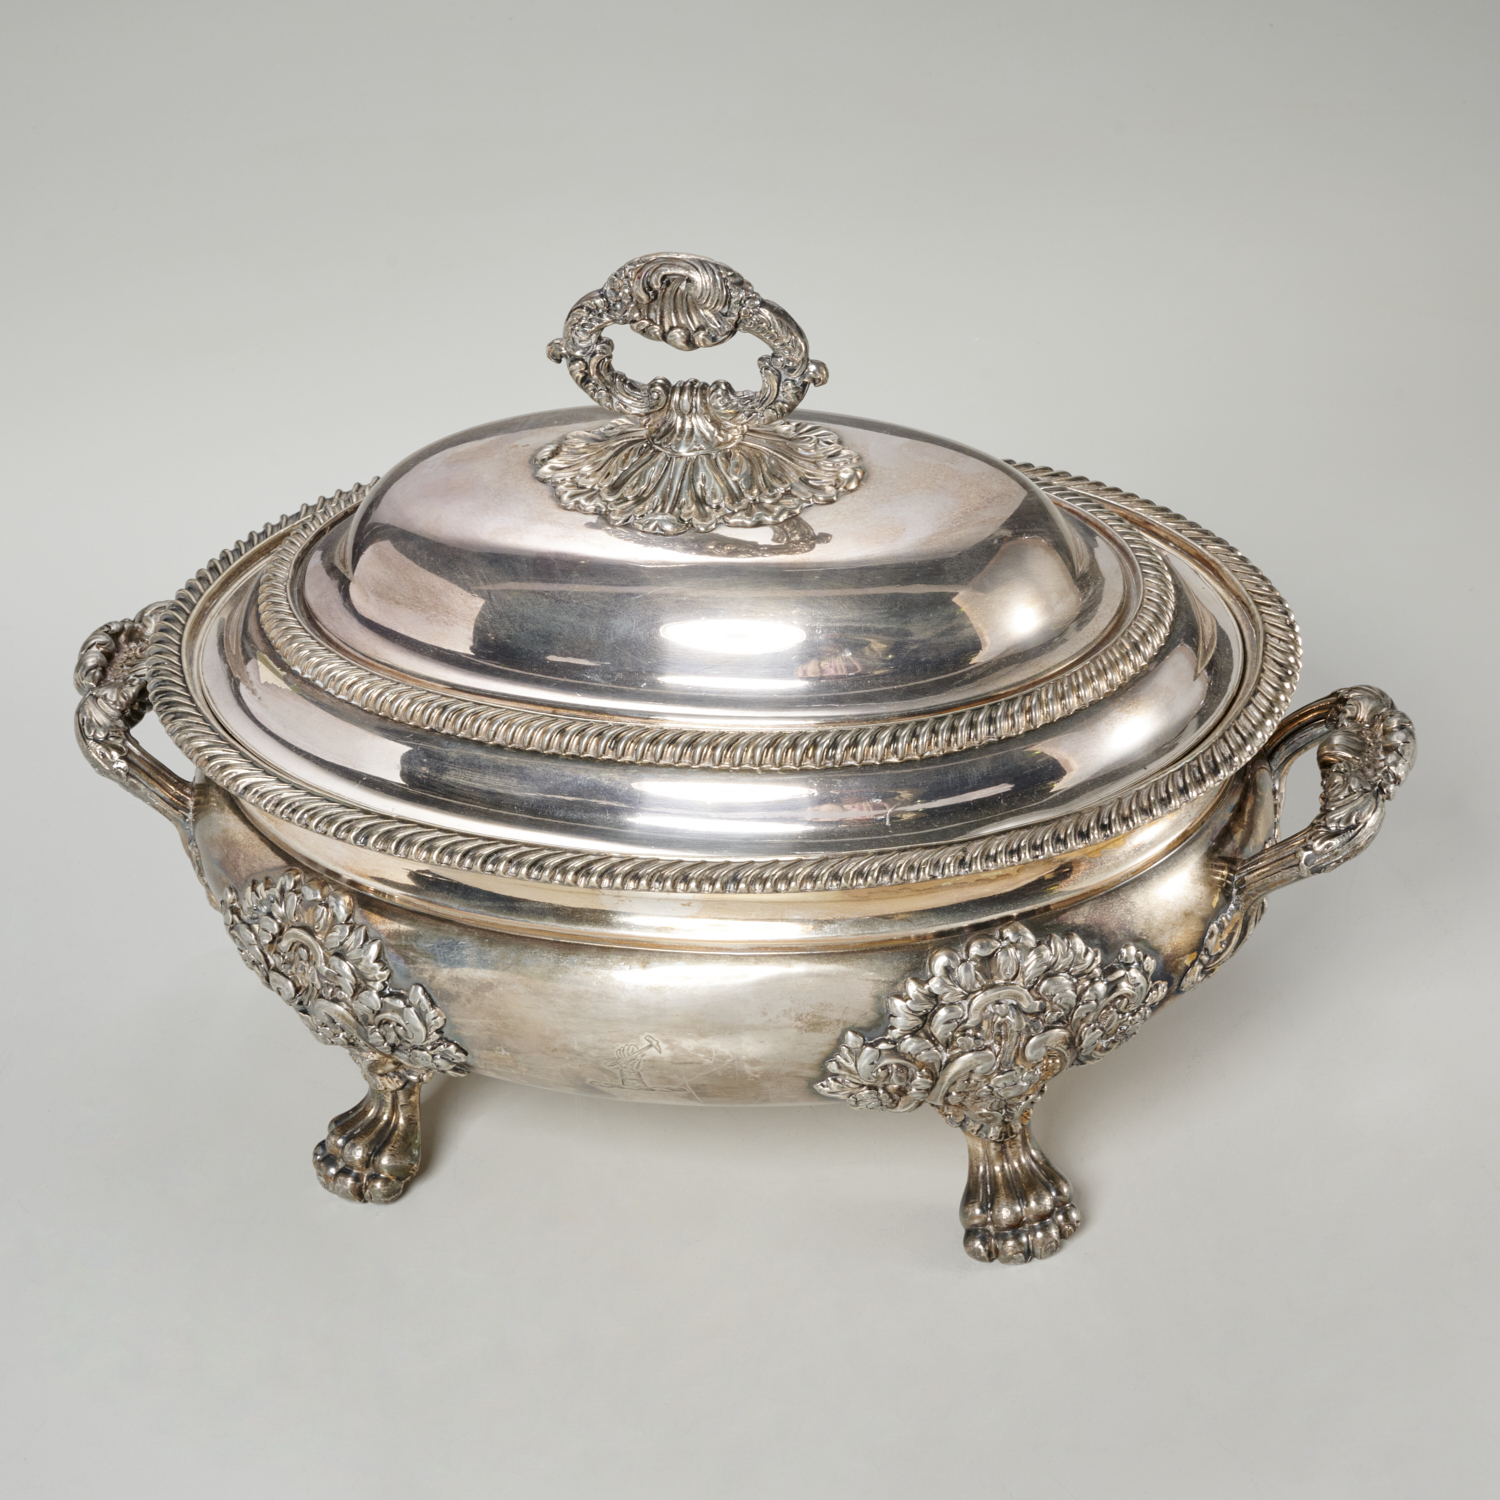 BOULTON STYLE ENGLISH SILVER PLATED